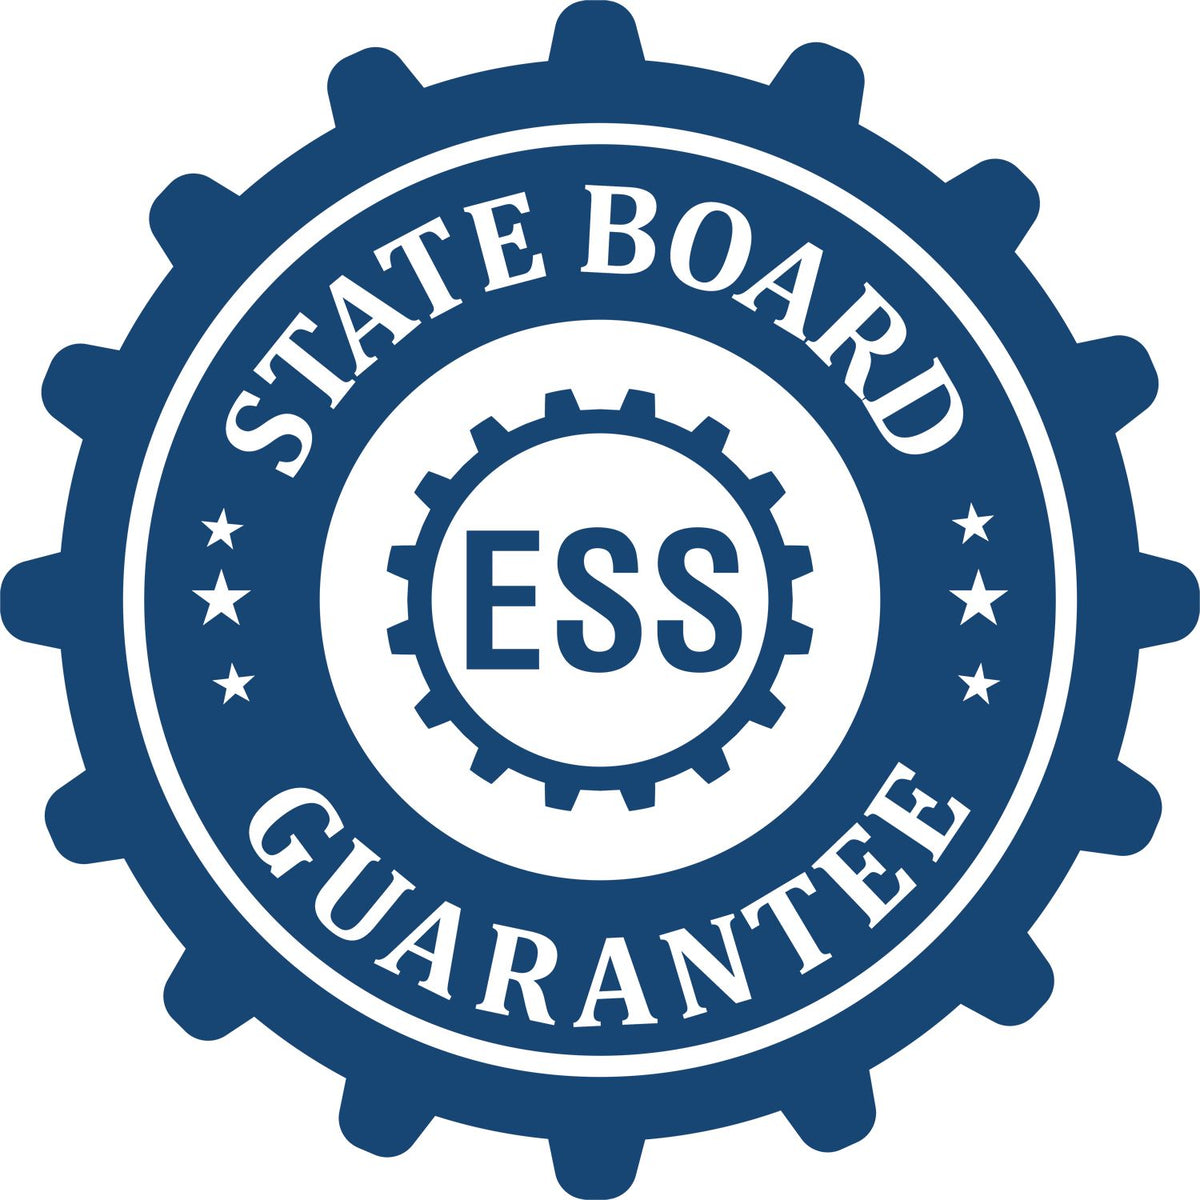 An emblem in a gear shape illustrating a state board guarantee for the South Carolina Engineer Desk Seal product.